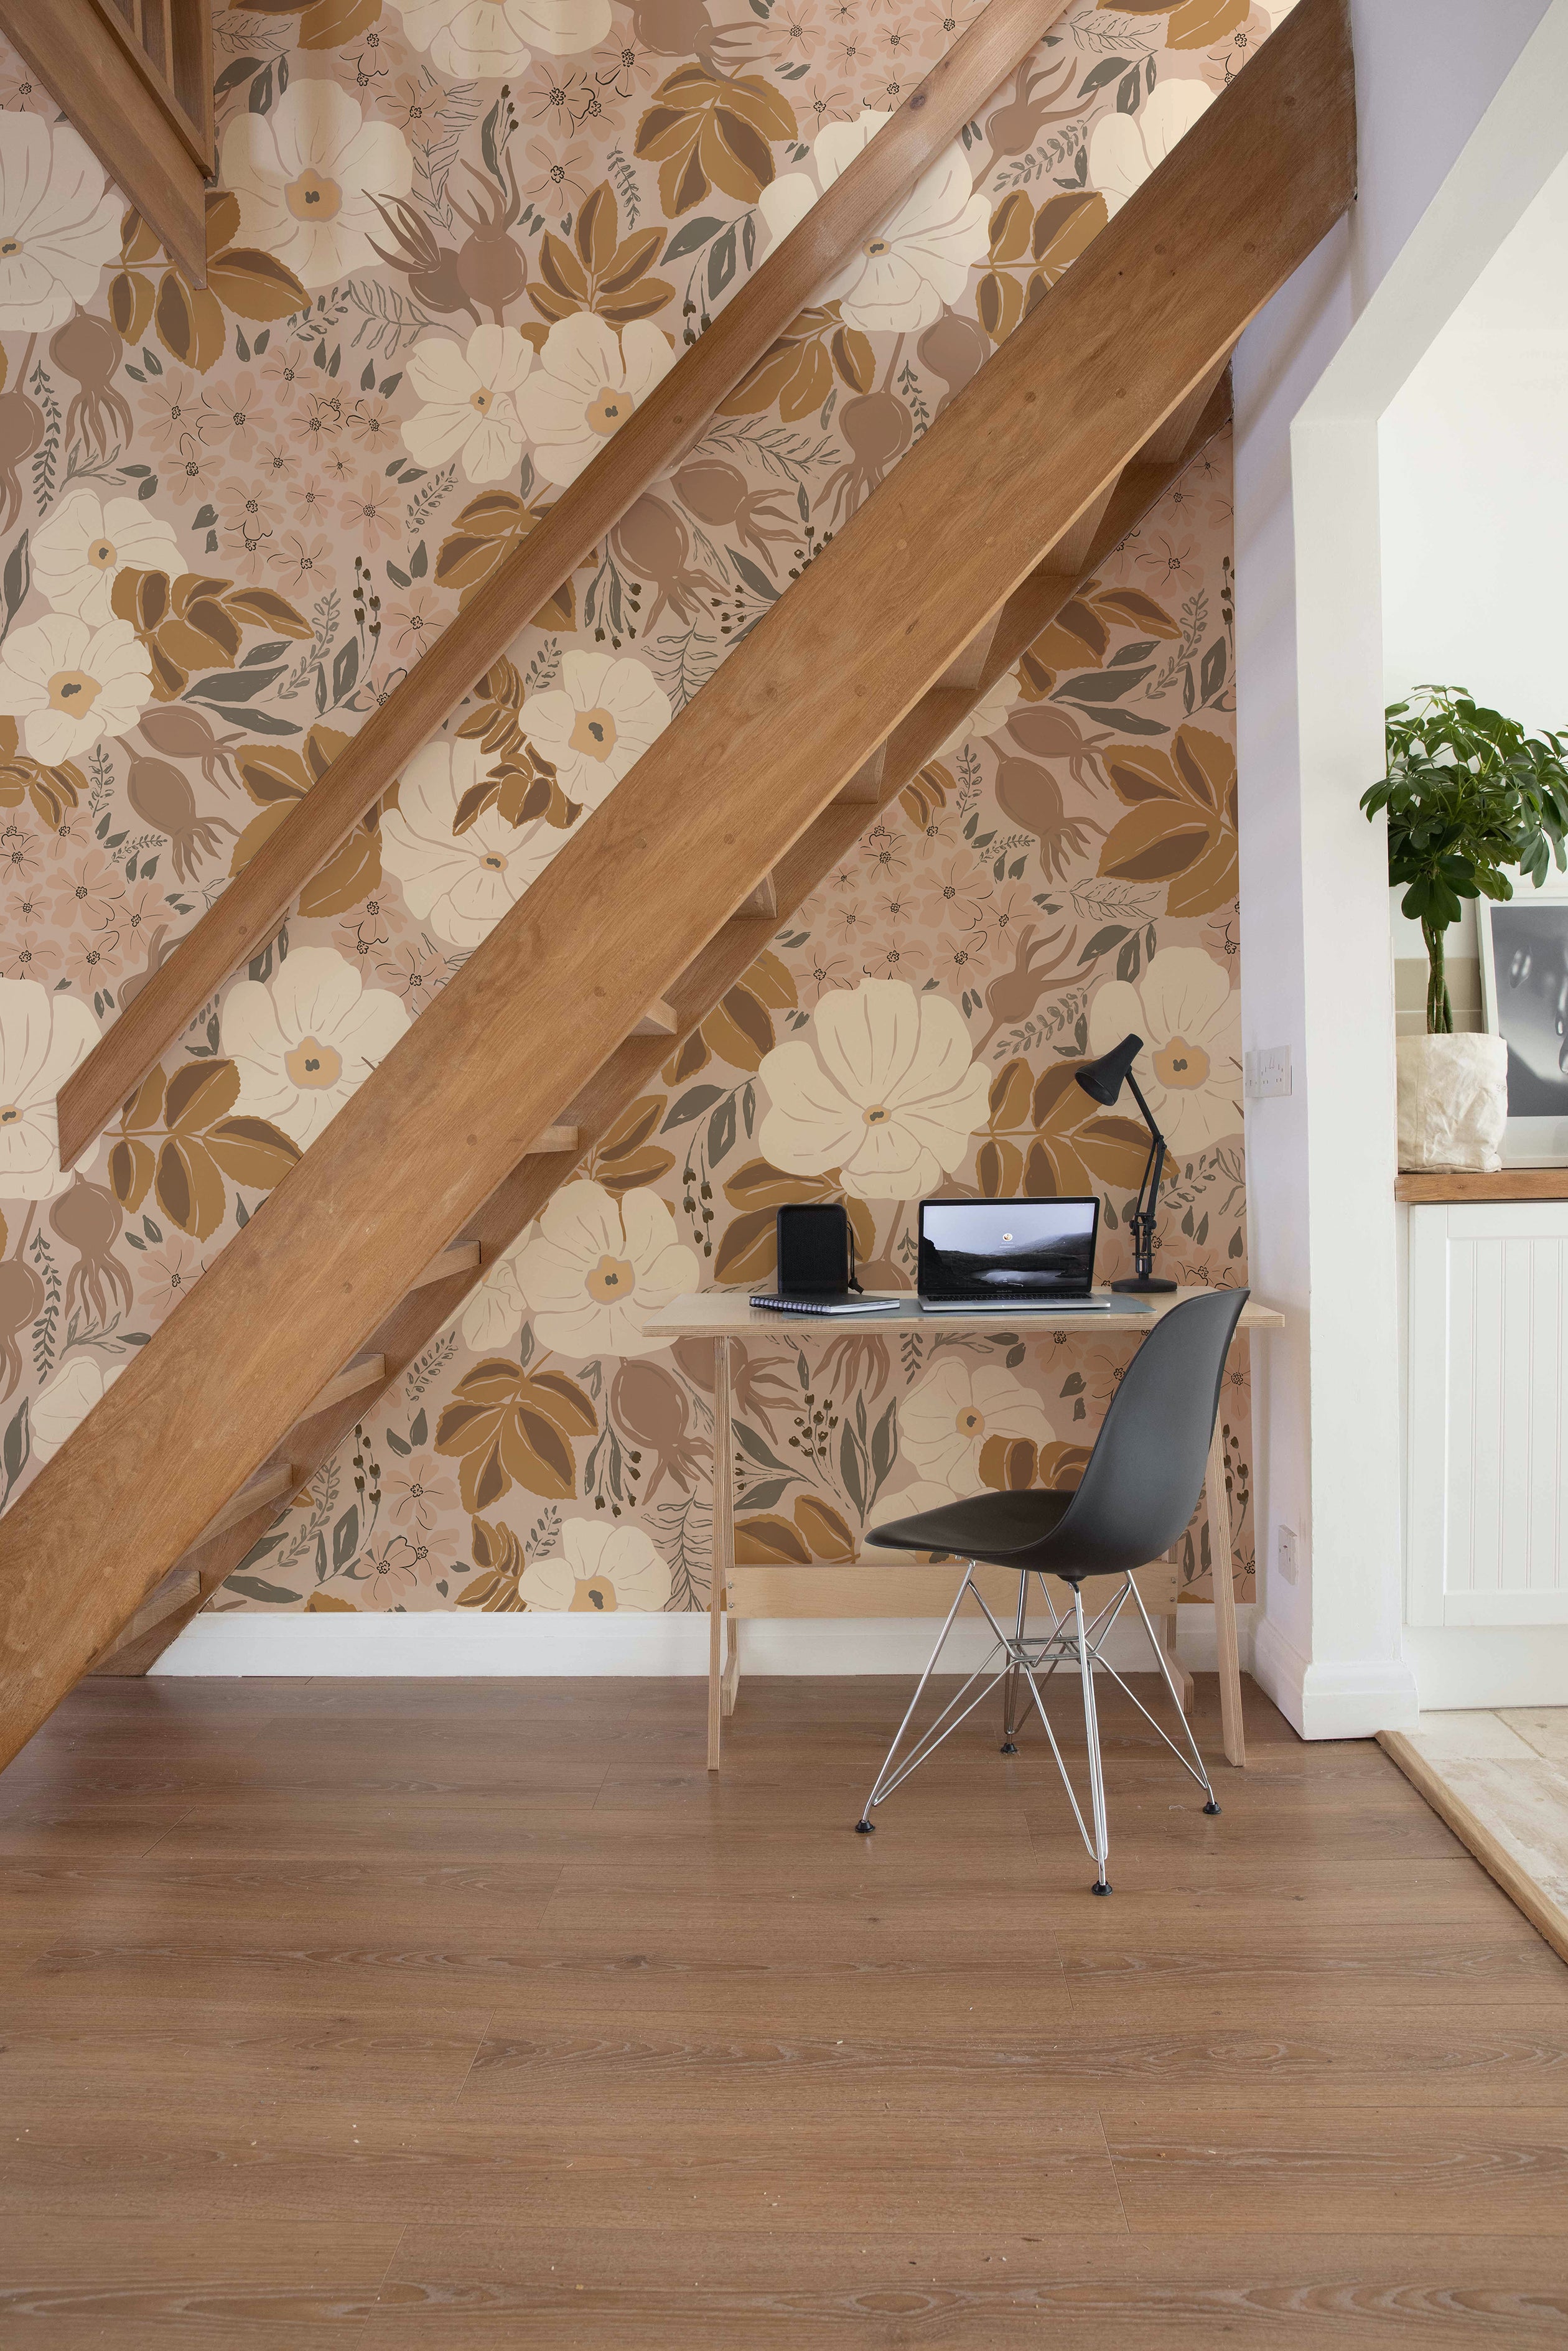 A compact home office situated under a staircase, with a large floral wallpaper providing a vibrant backdrop. The workspace includes a simple desk, a modern chair, and a small laptop